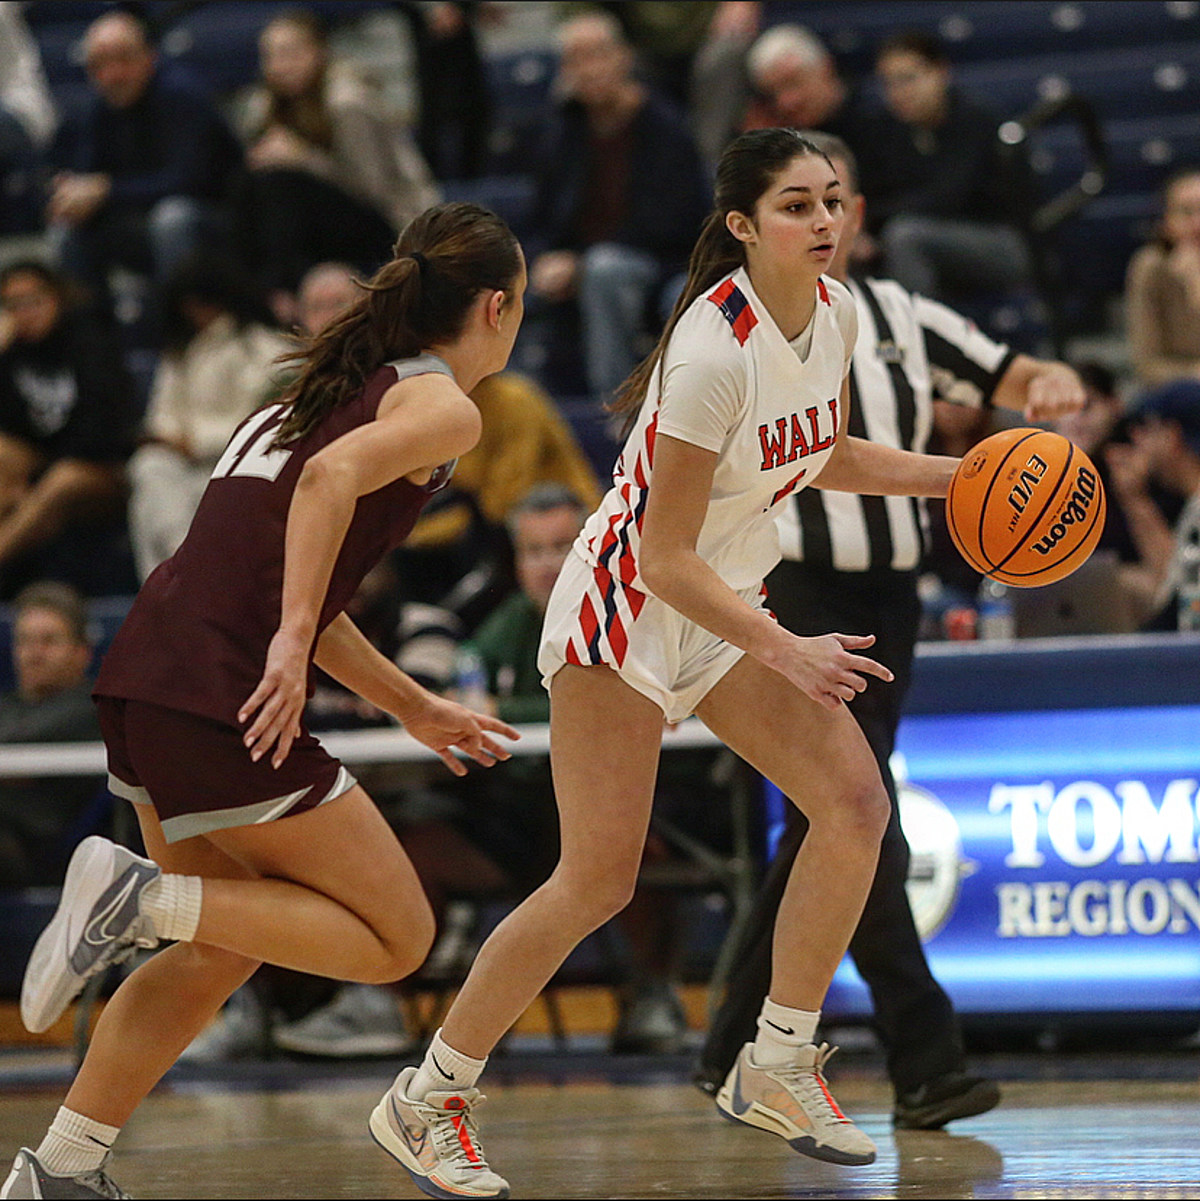 Exciting Shore Conference Girls High School Basketball Games of the Week: Wall vs. Manchester, Rumson-Fair Haven vs. St. Rose, and Red Bank Catholic vs. Ocean Township